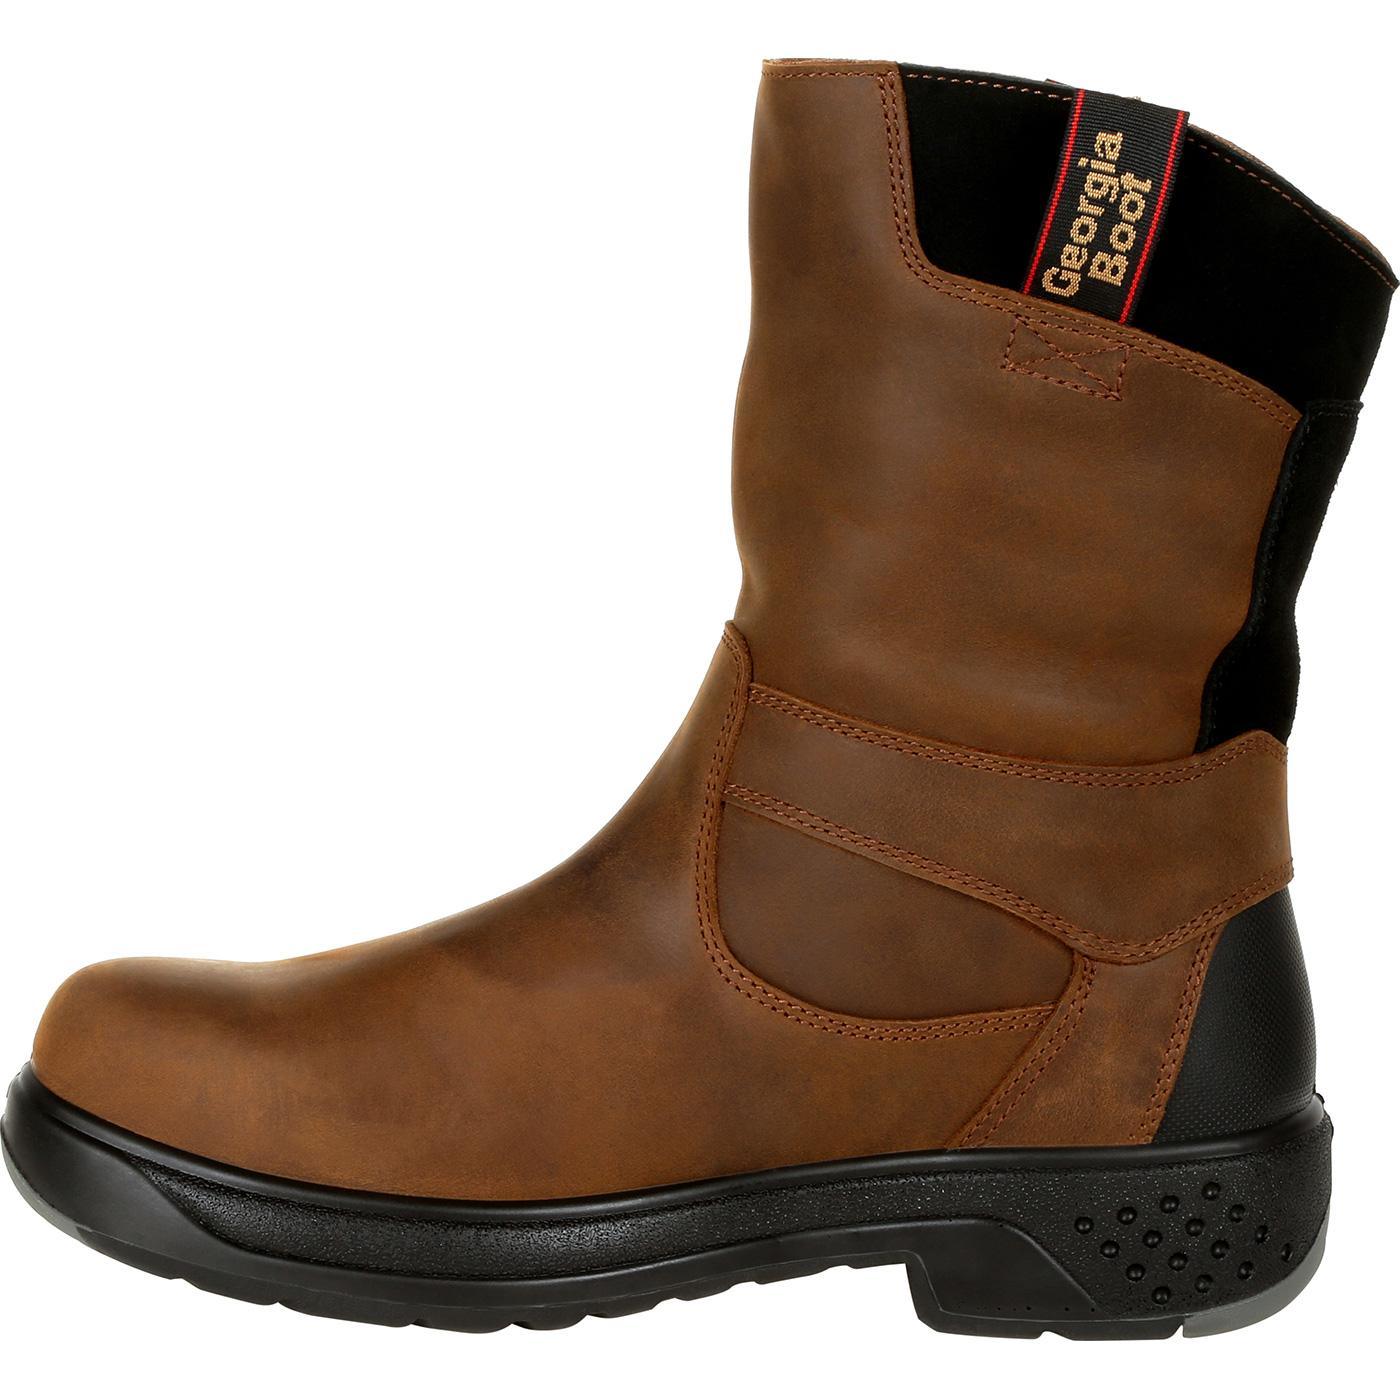 Georgia FLXpoint Waterproof Composite Toe Work Boots - Flyclothing LLC